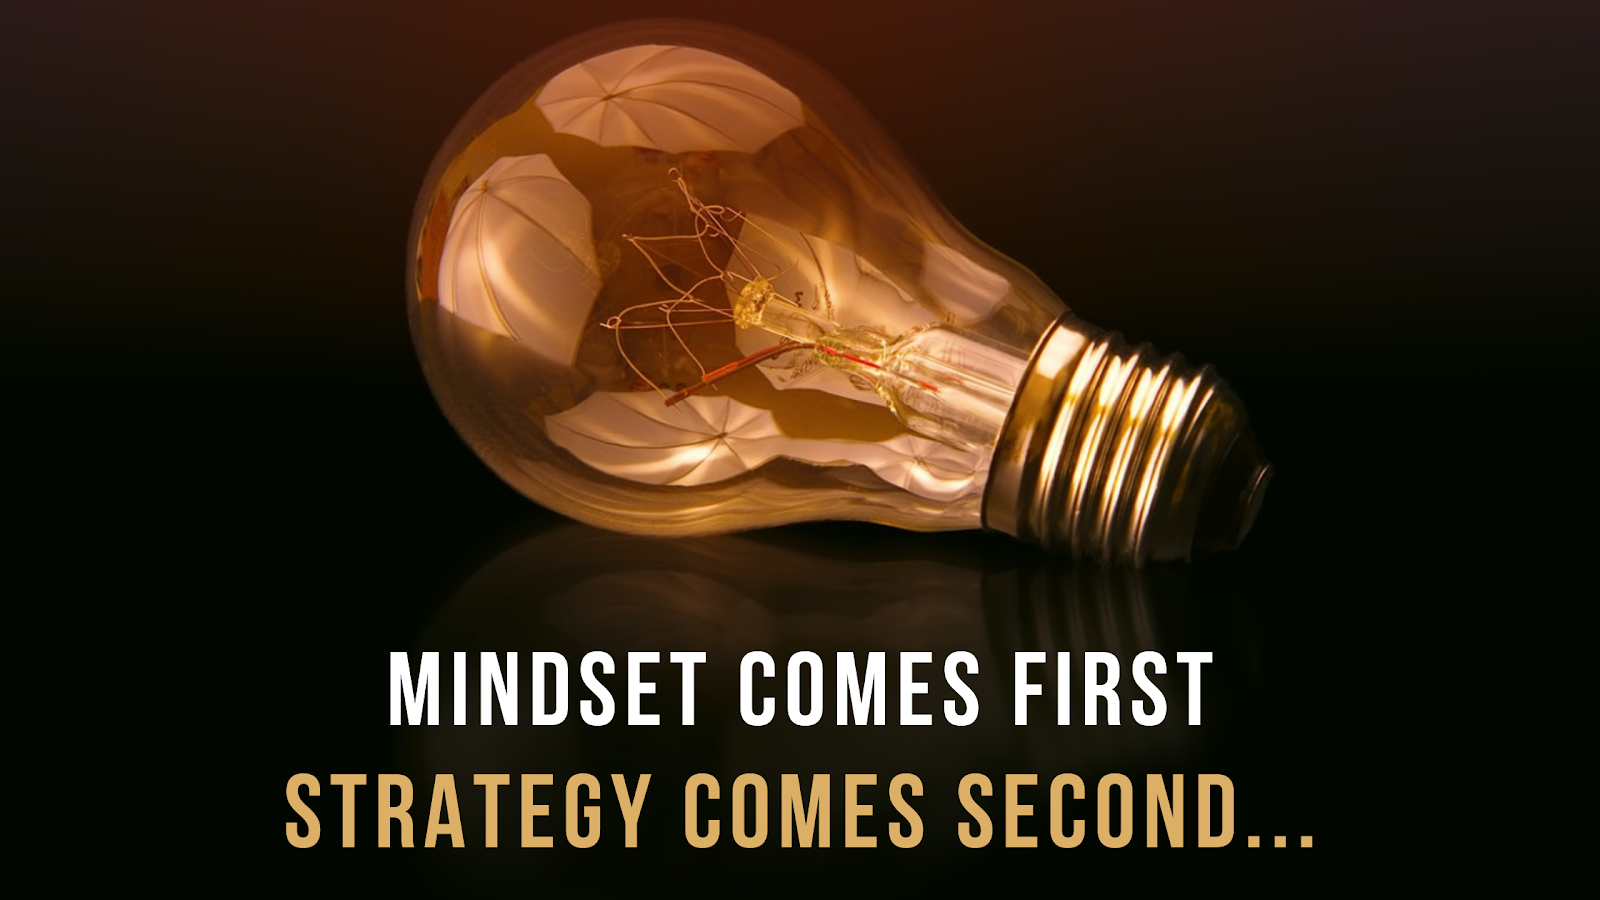 Cold calling - Mindset comes first, strategy comes second